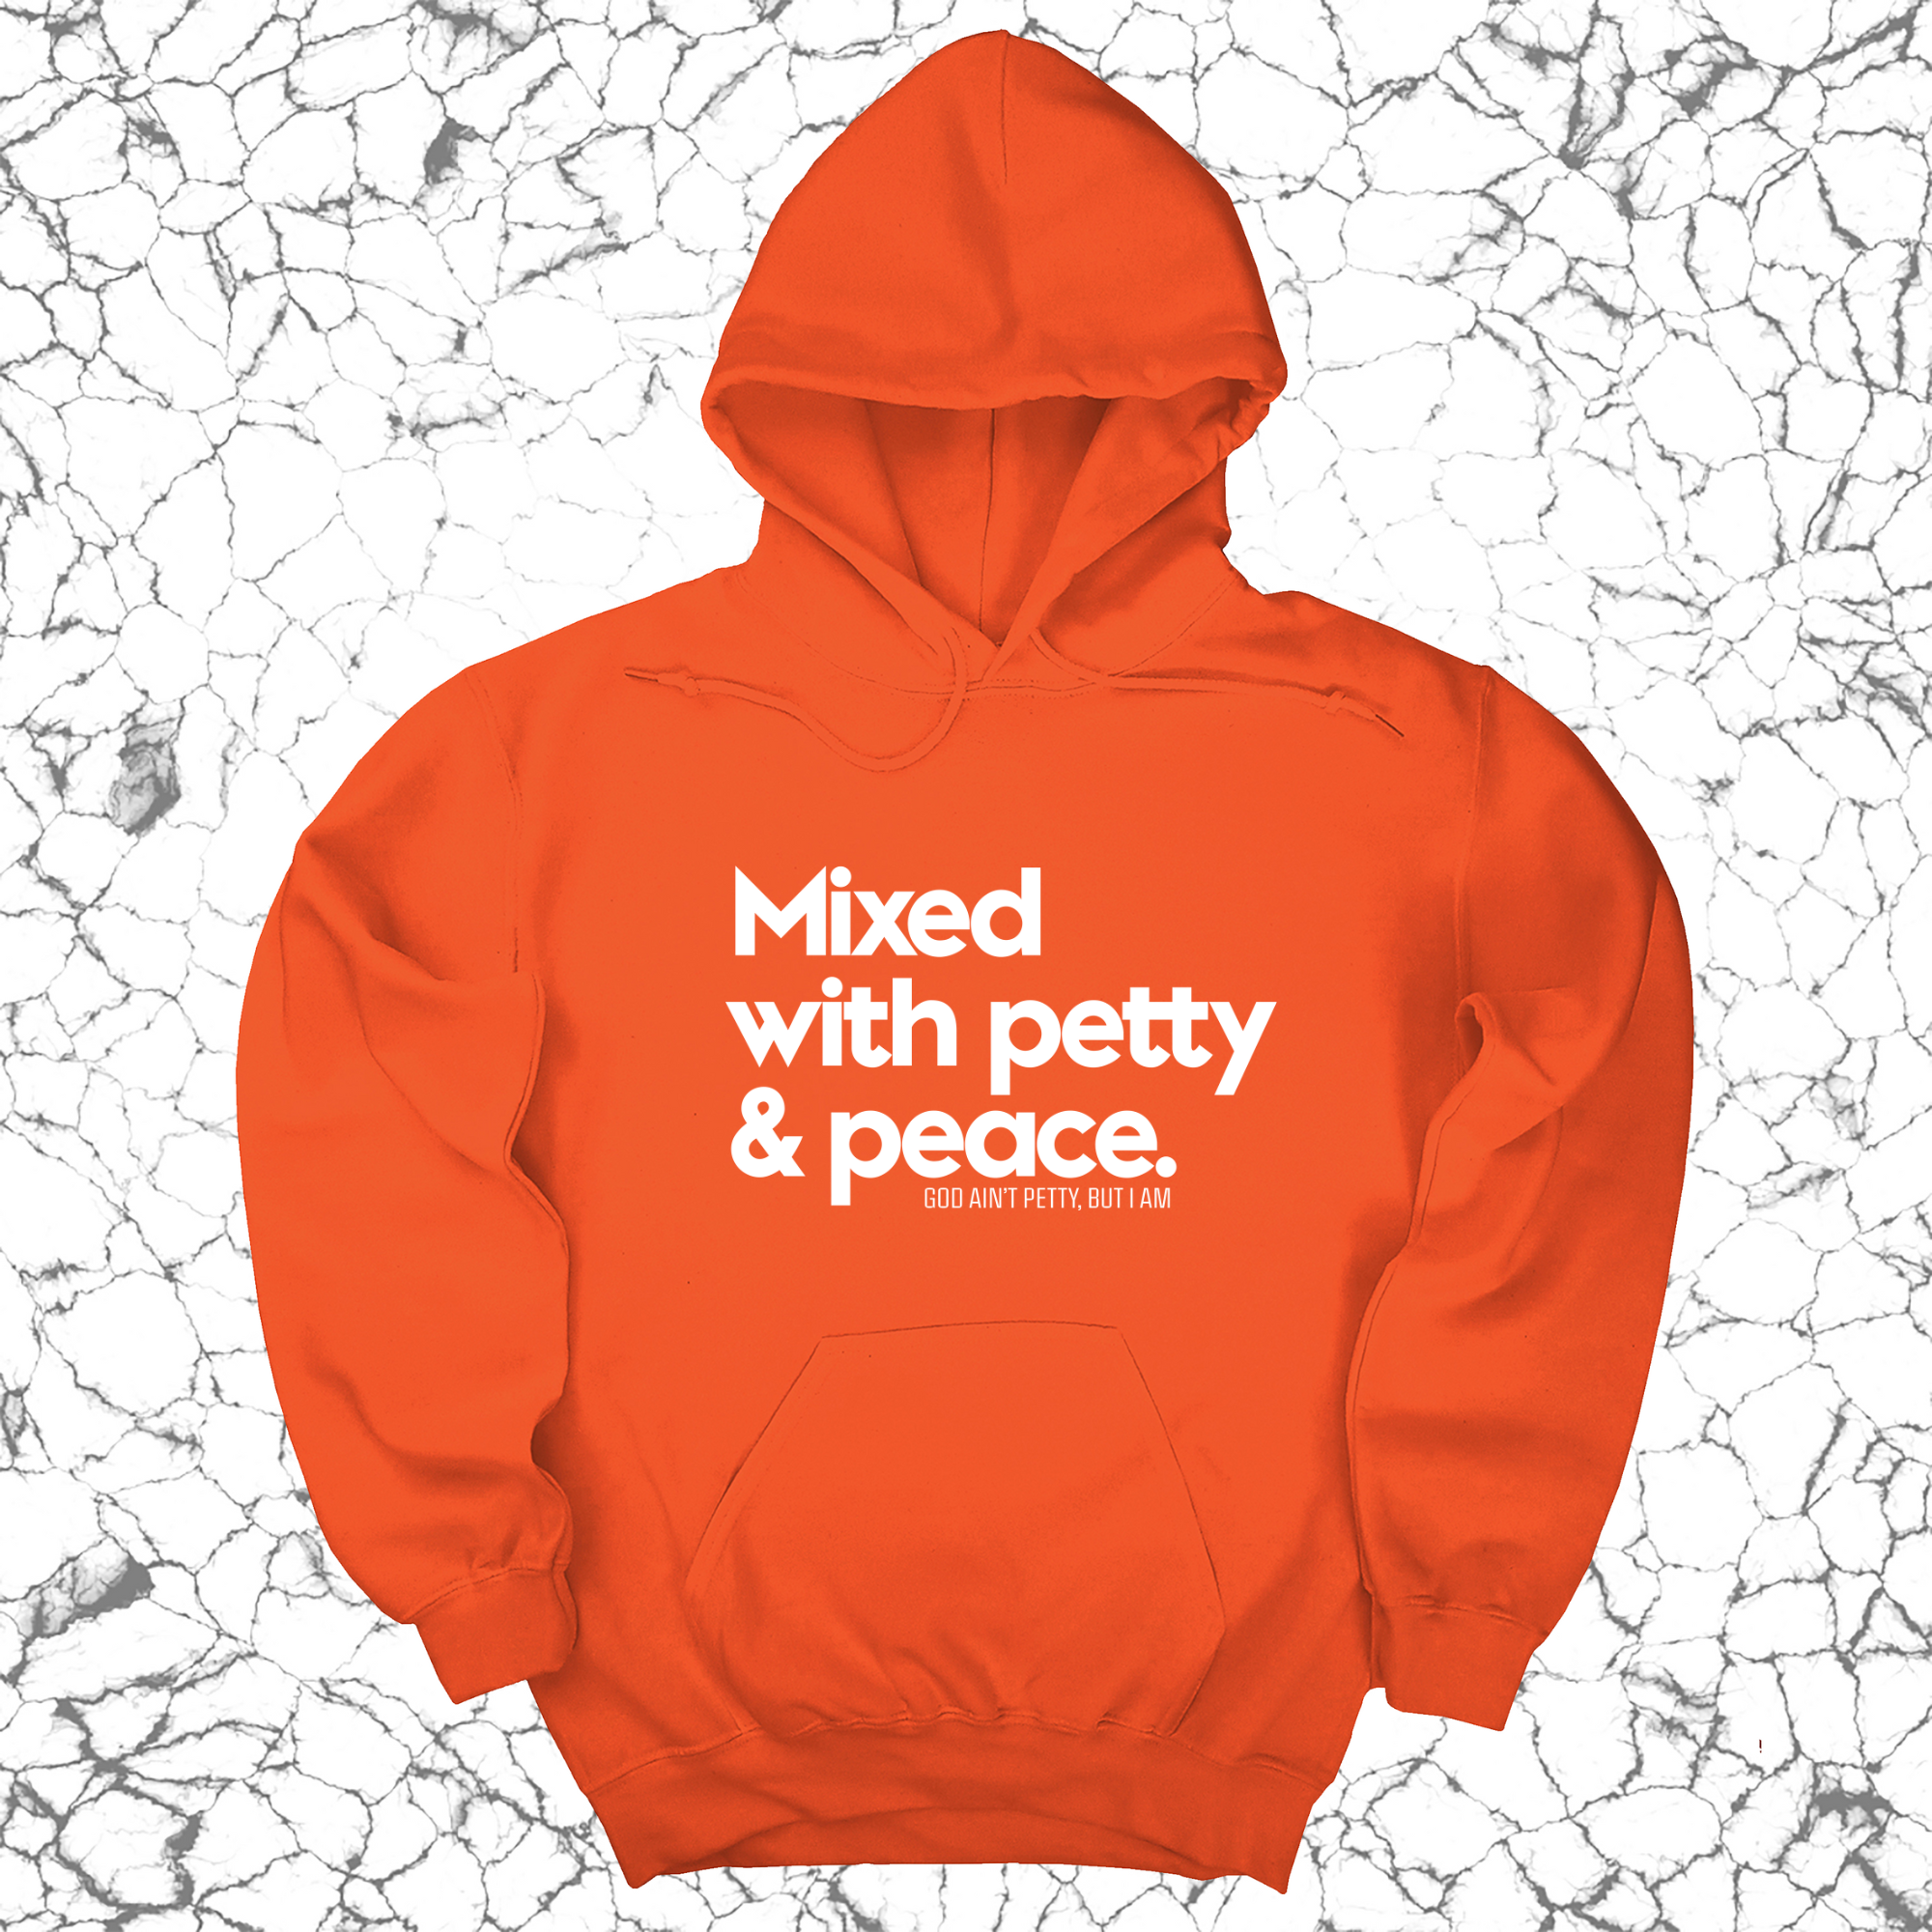 Mixed with petty & peace Unisex Hoodie-Hoodie-The Original God Ain't Petty But I Am